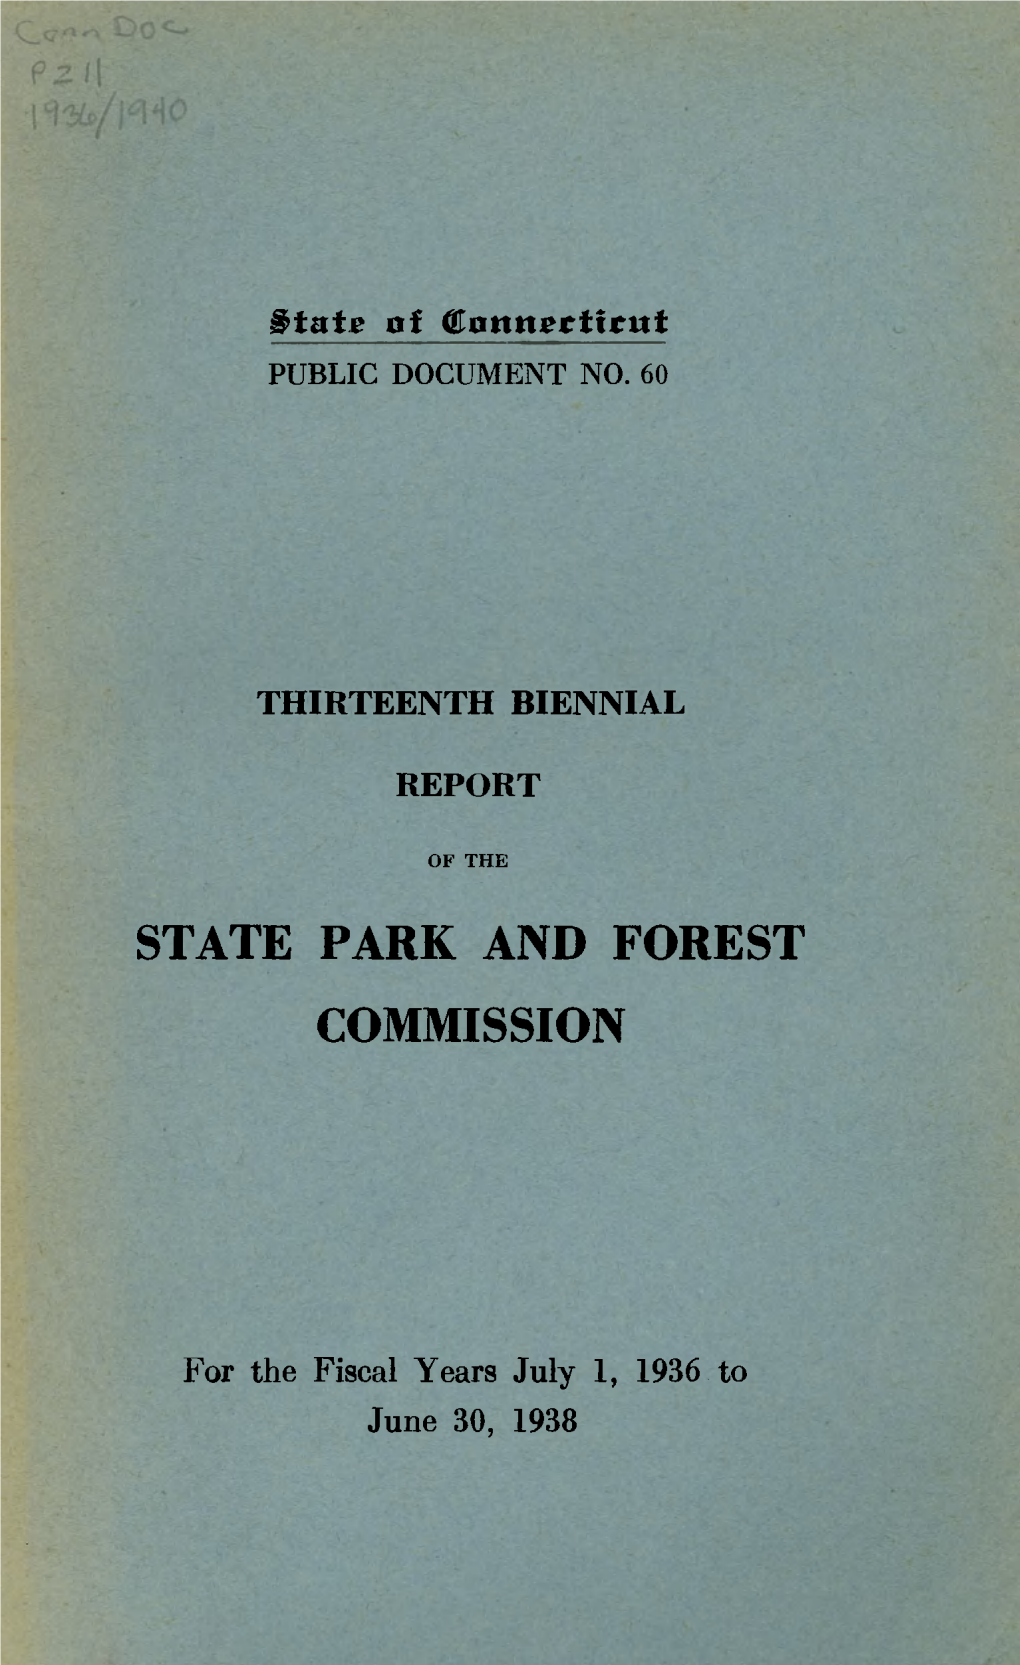 State Park and Forest Commission